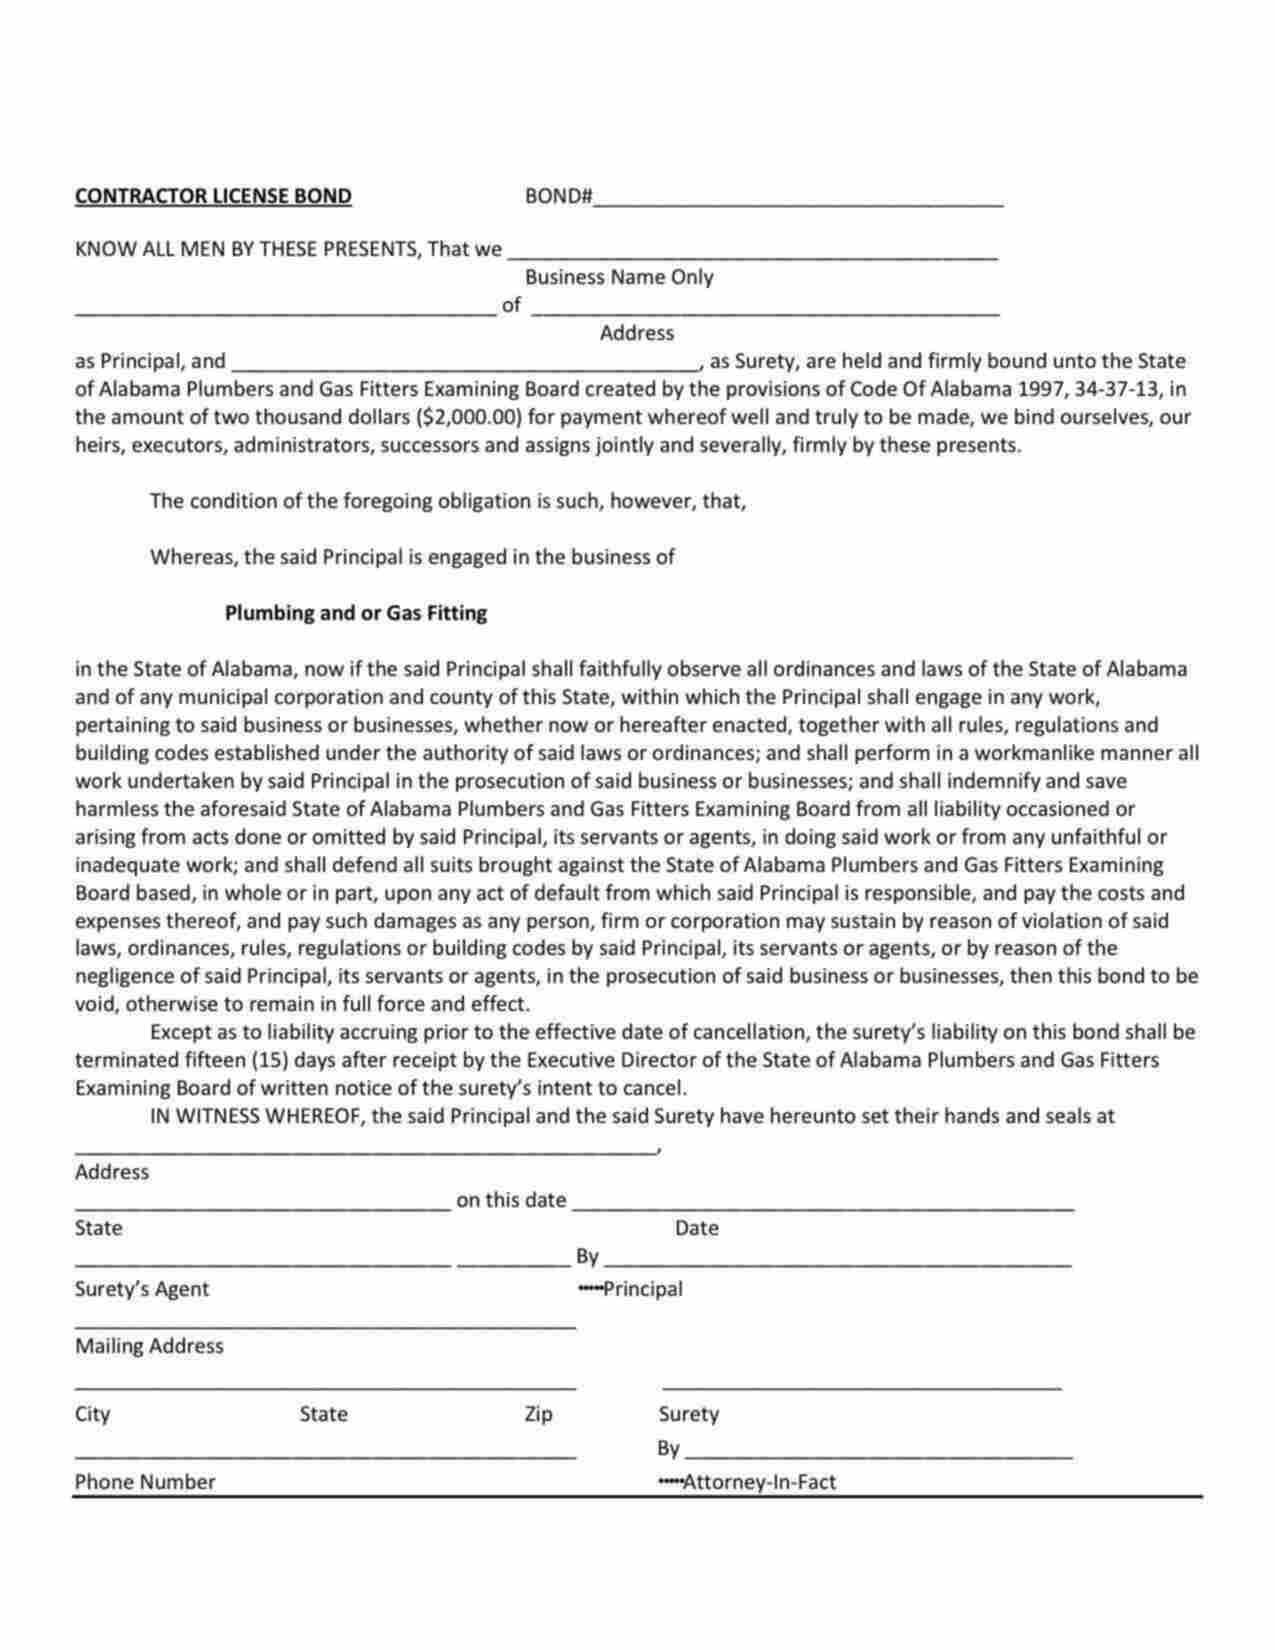 Alabama Plumbing and/or Gas Fitting Contractor Bond Form